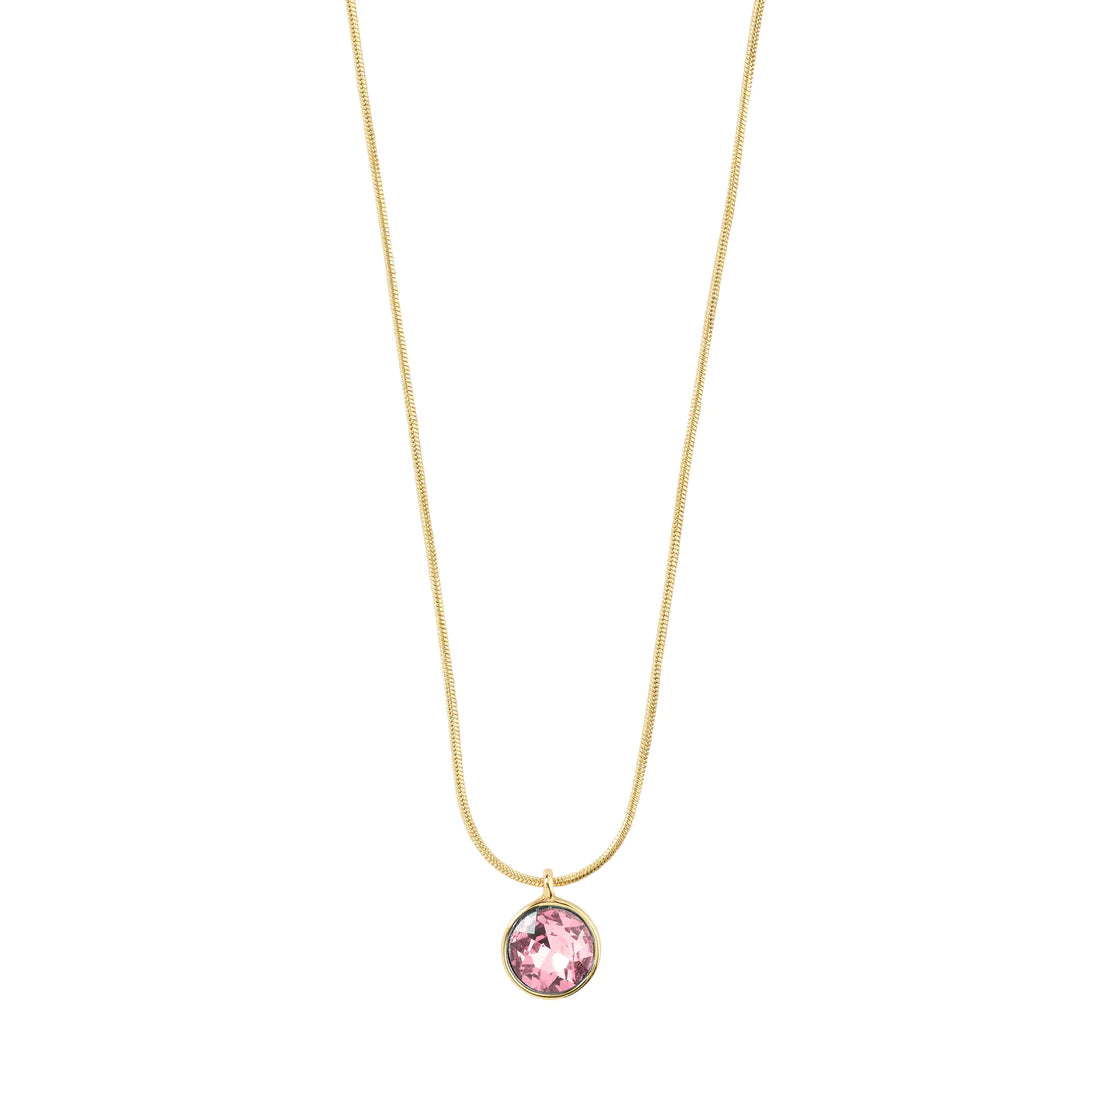 Callie Crystal Pendant Necklace - Rose/Gold